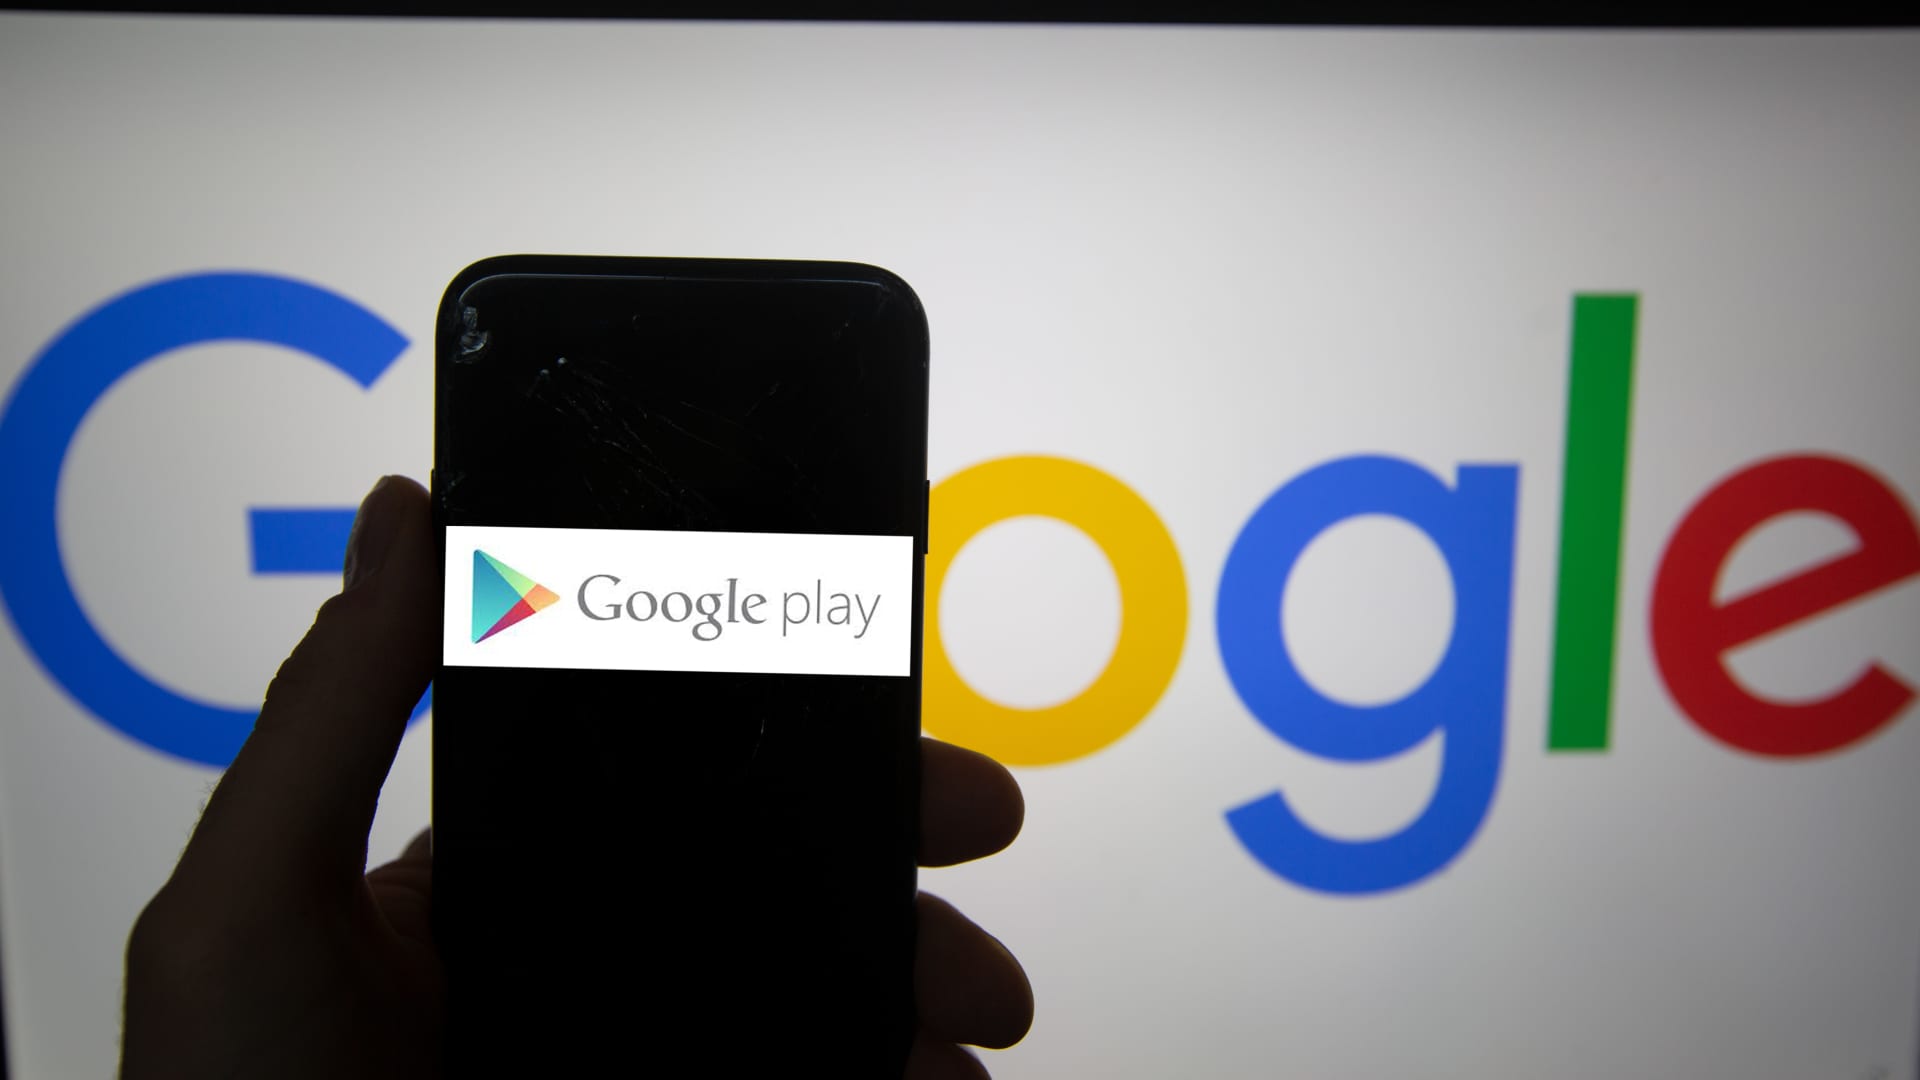 The logo of Google Play is seen on a screen.